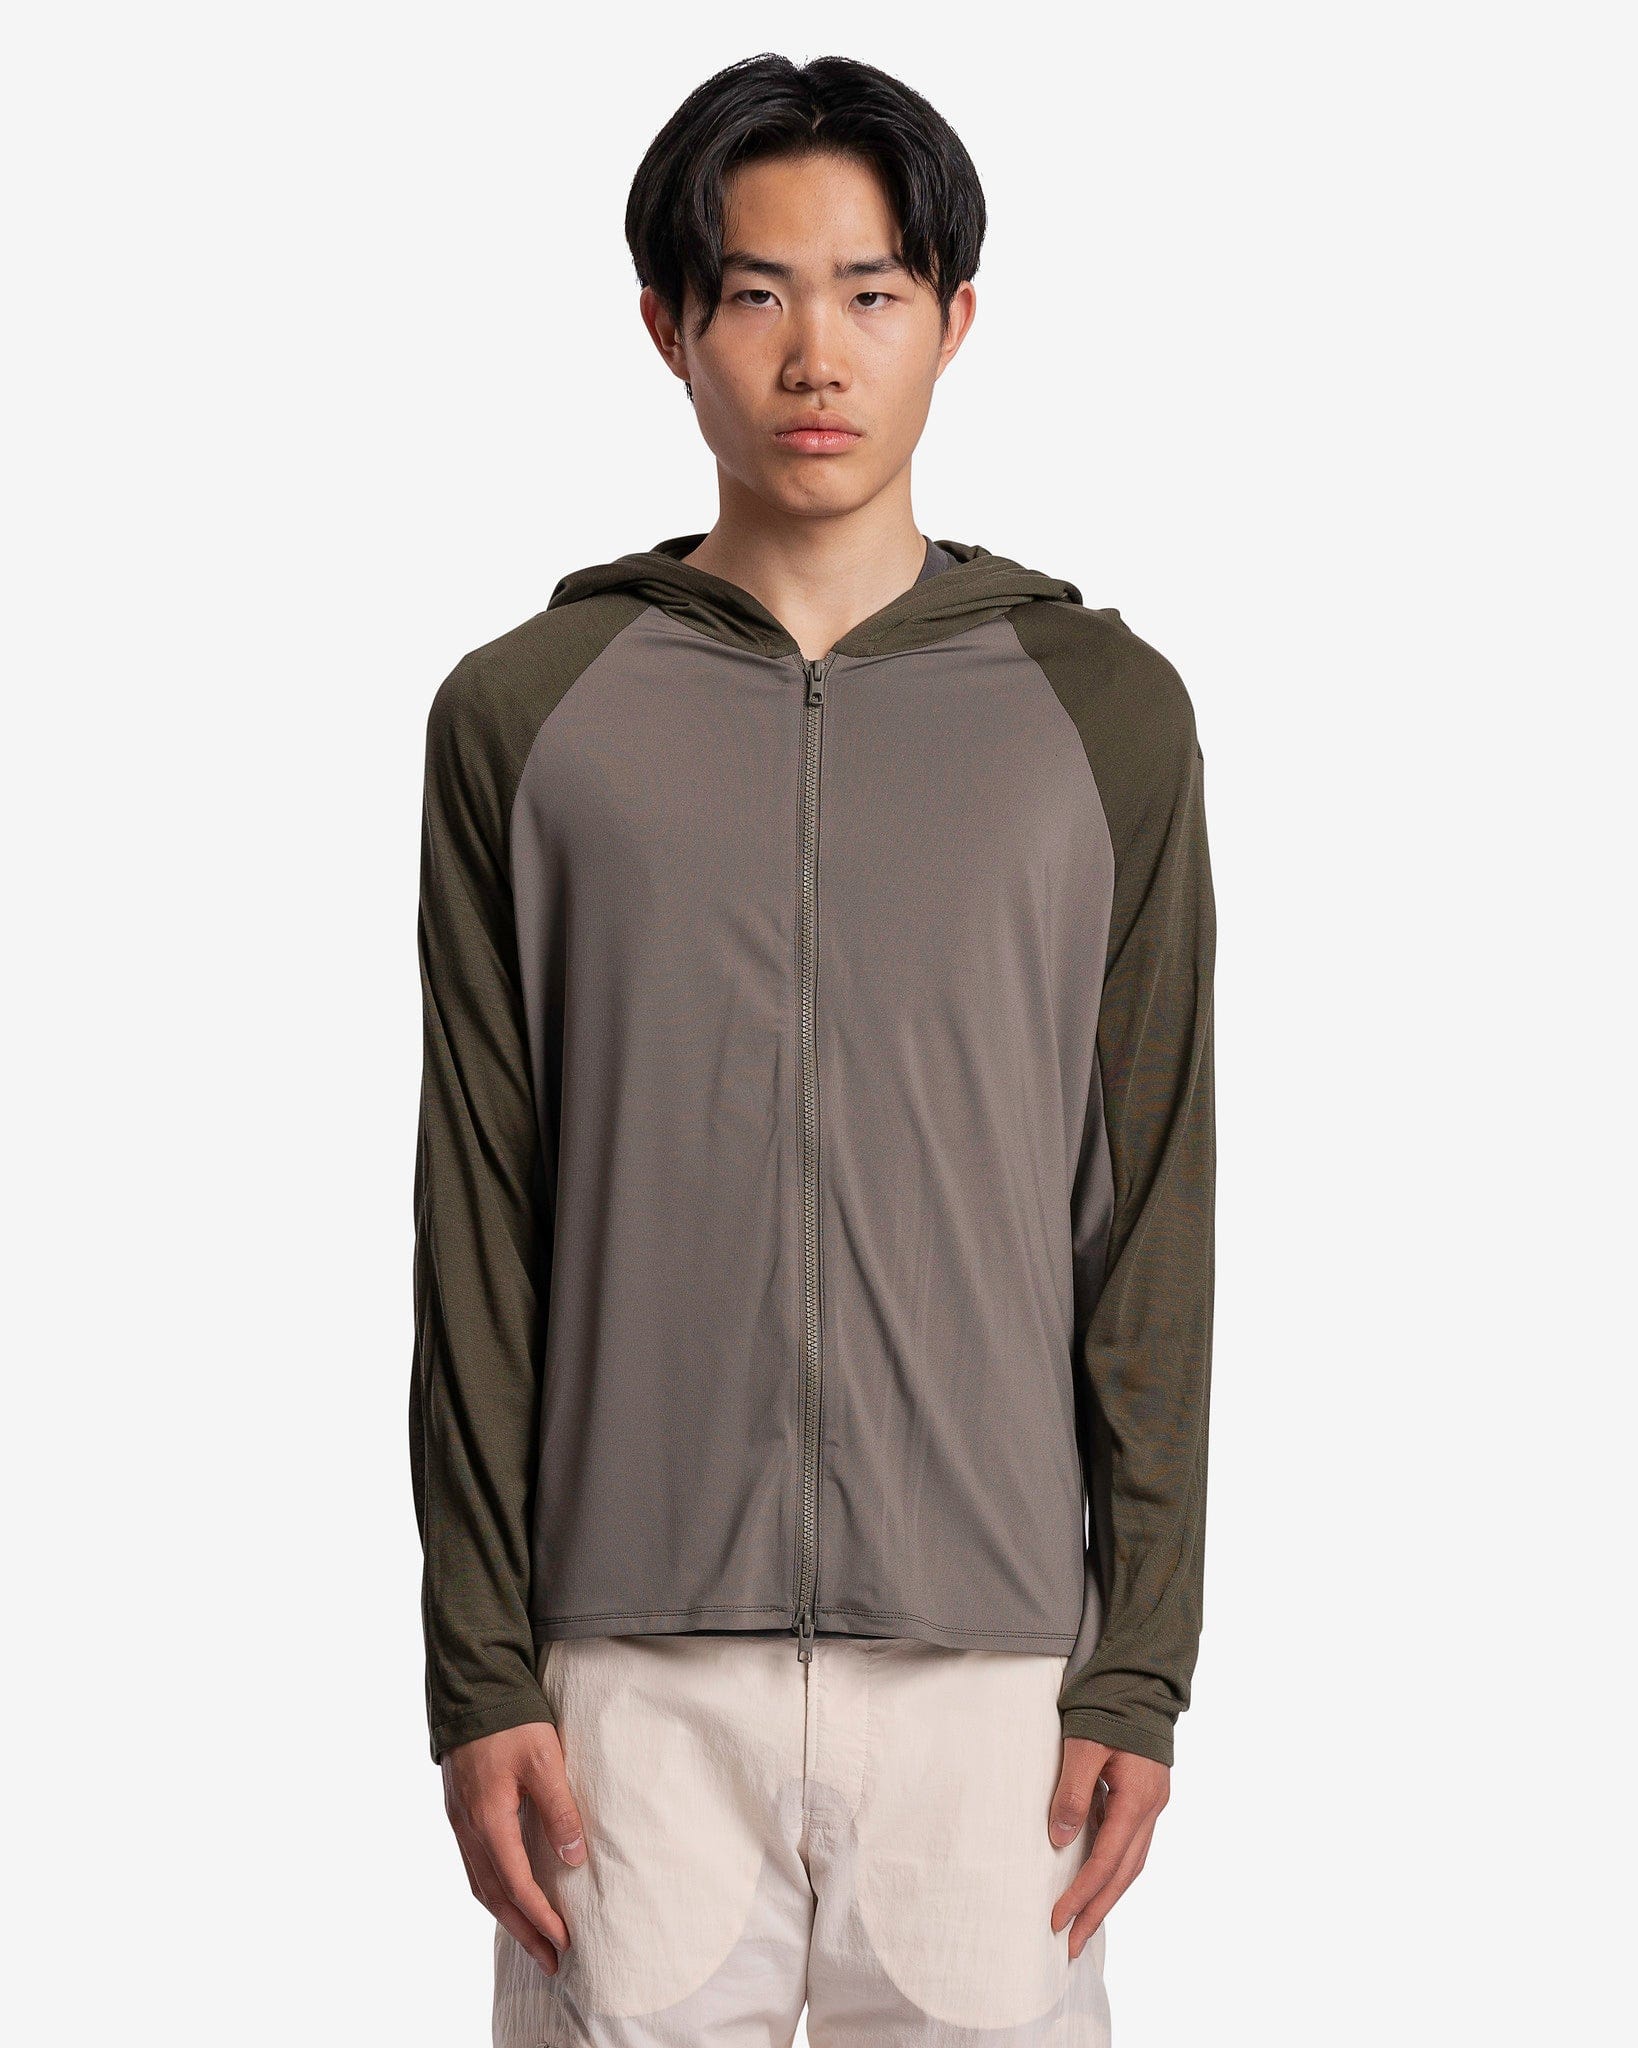 POST ARCHIVE FACTION (P.A.F) Men's Sweatshirts Hoodie Right in Olive Green